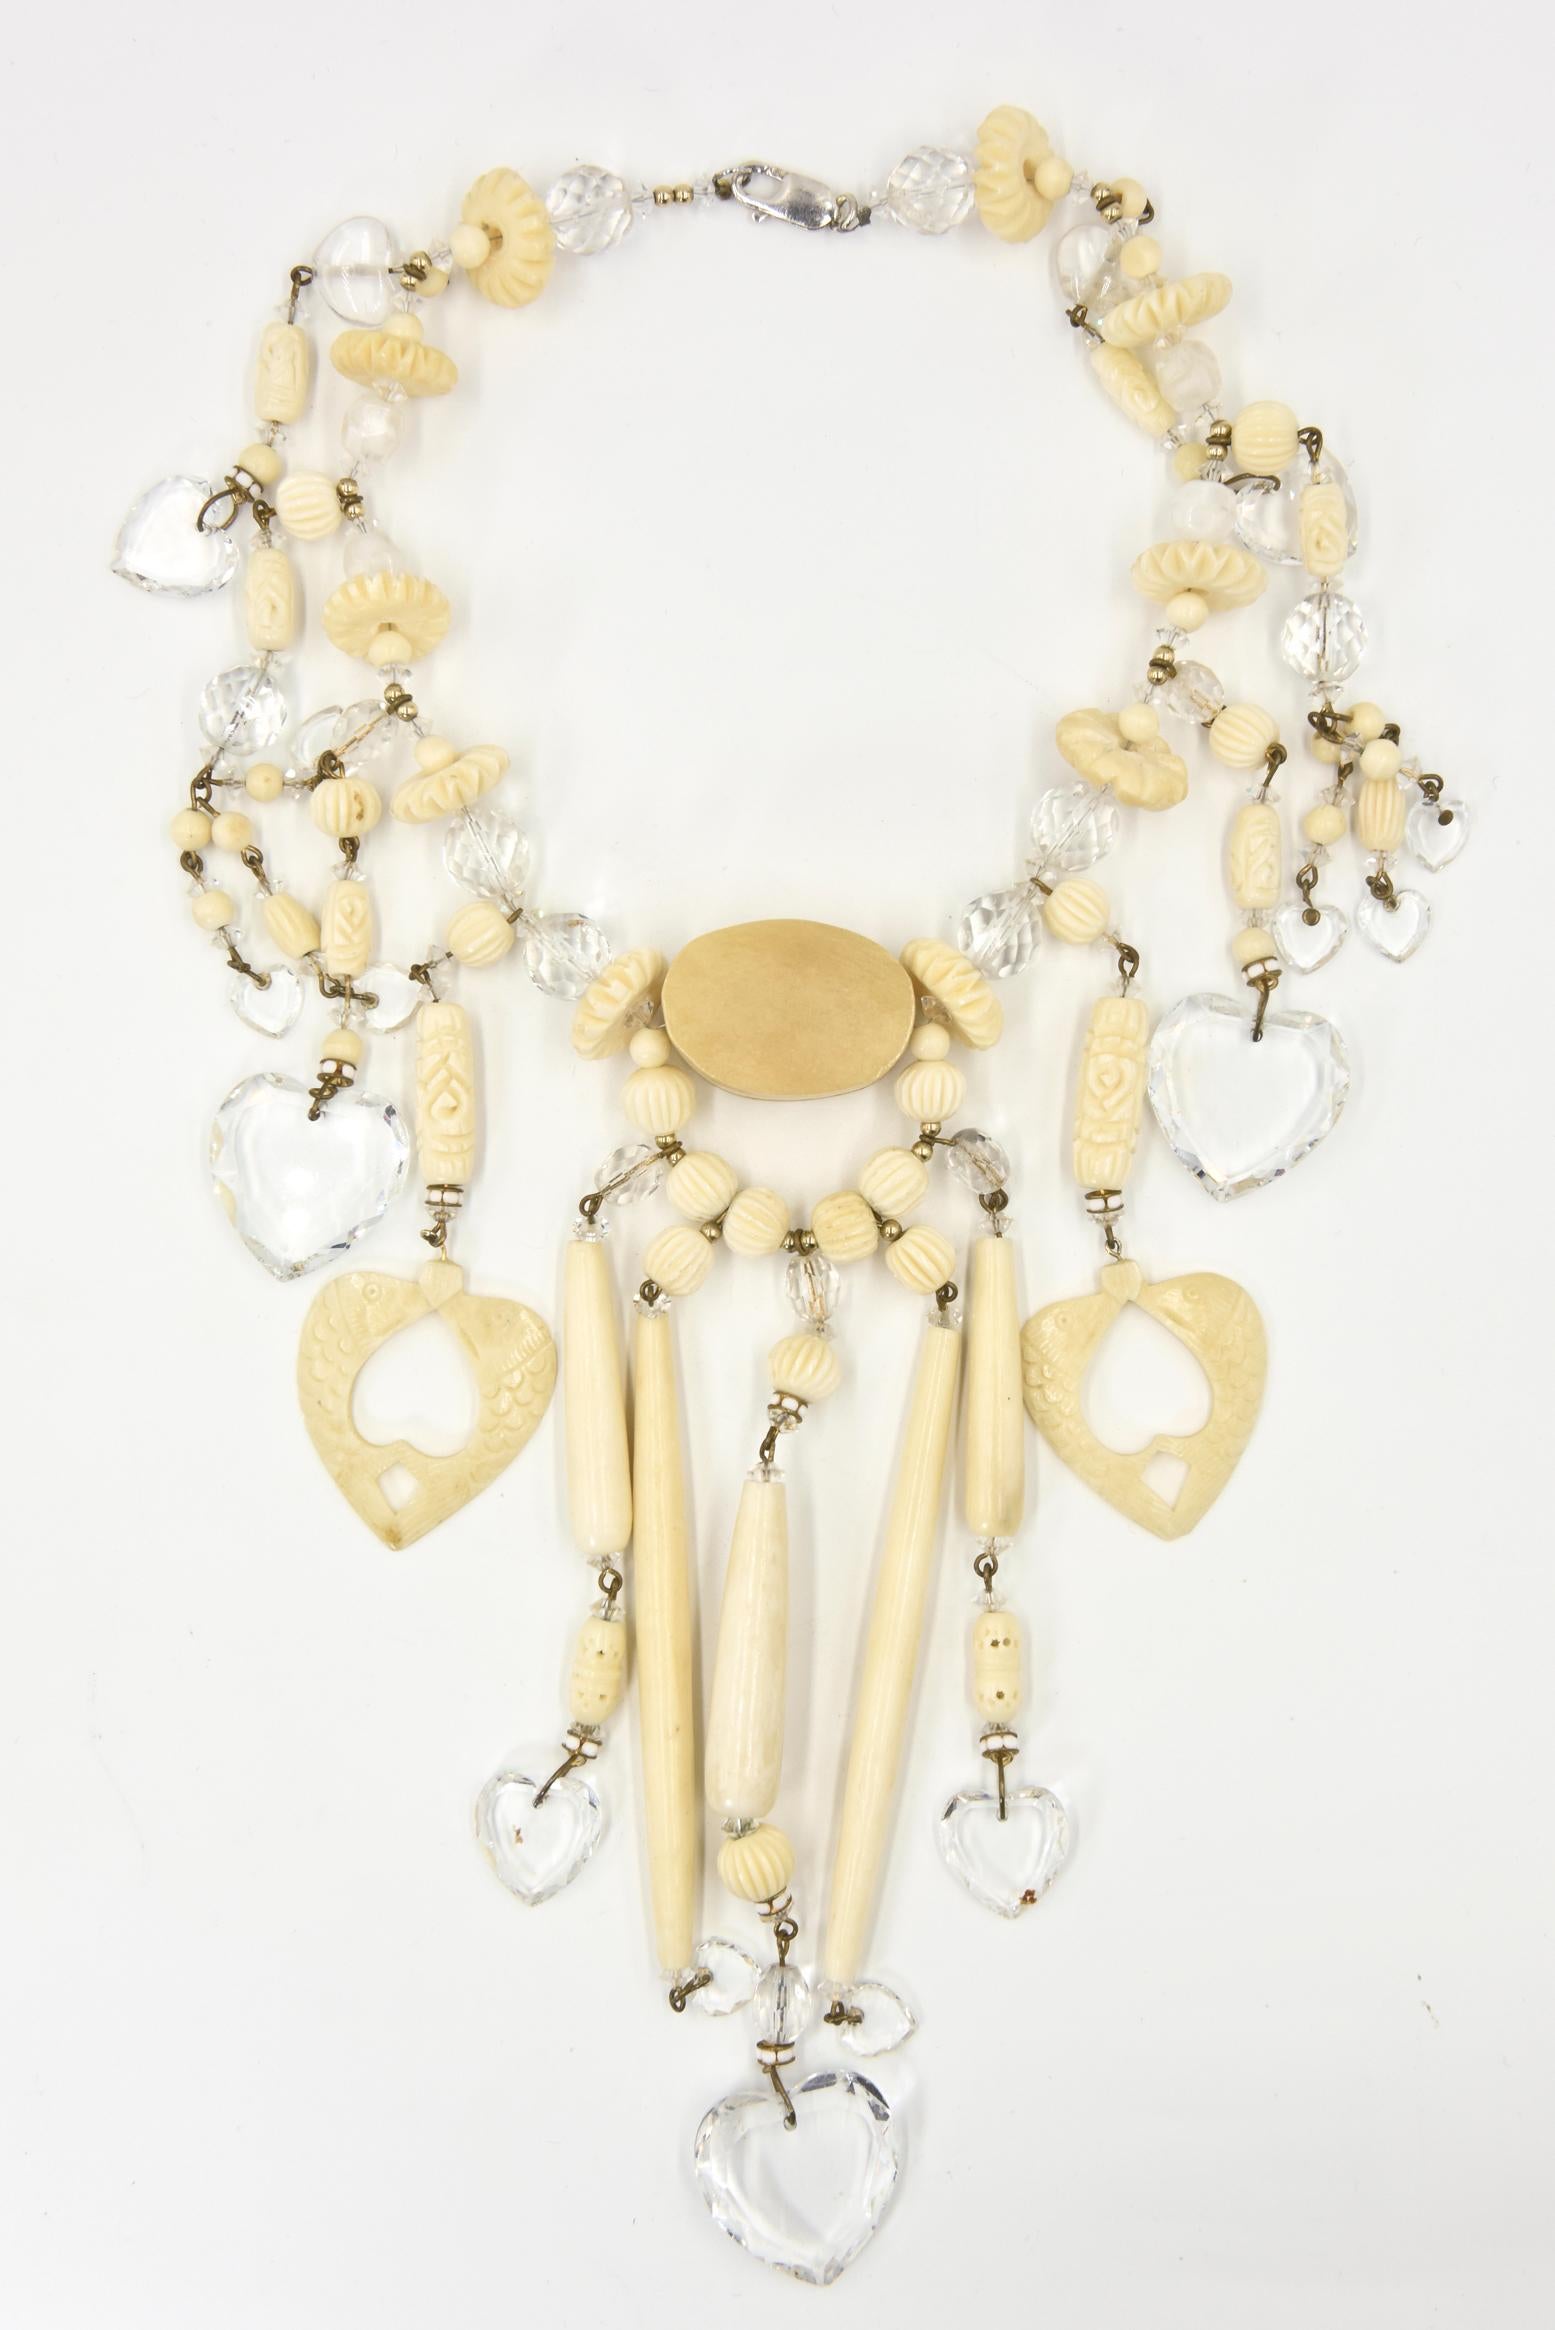 Women's Bohemian Chic Carved Bone and Lucite Hearts Bib Necklace with Dangling Earrings  For Sale